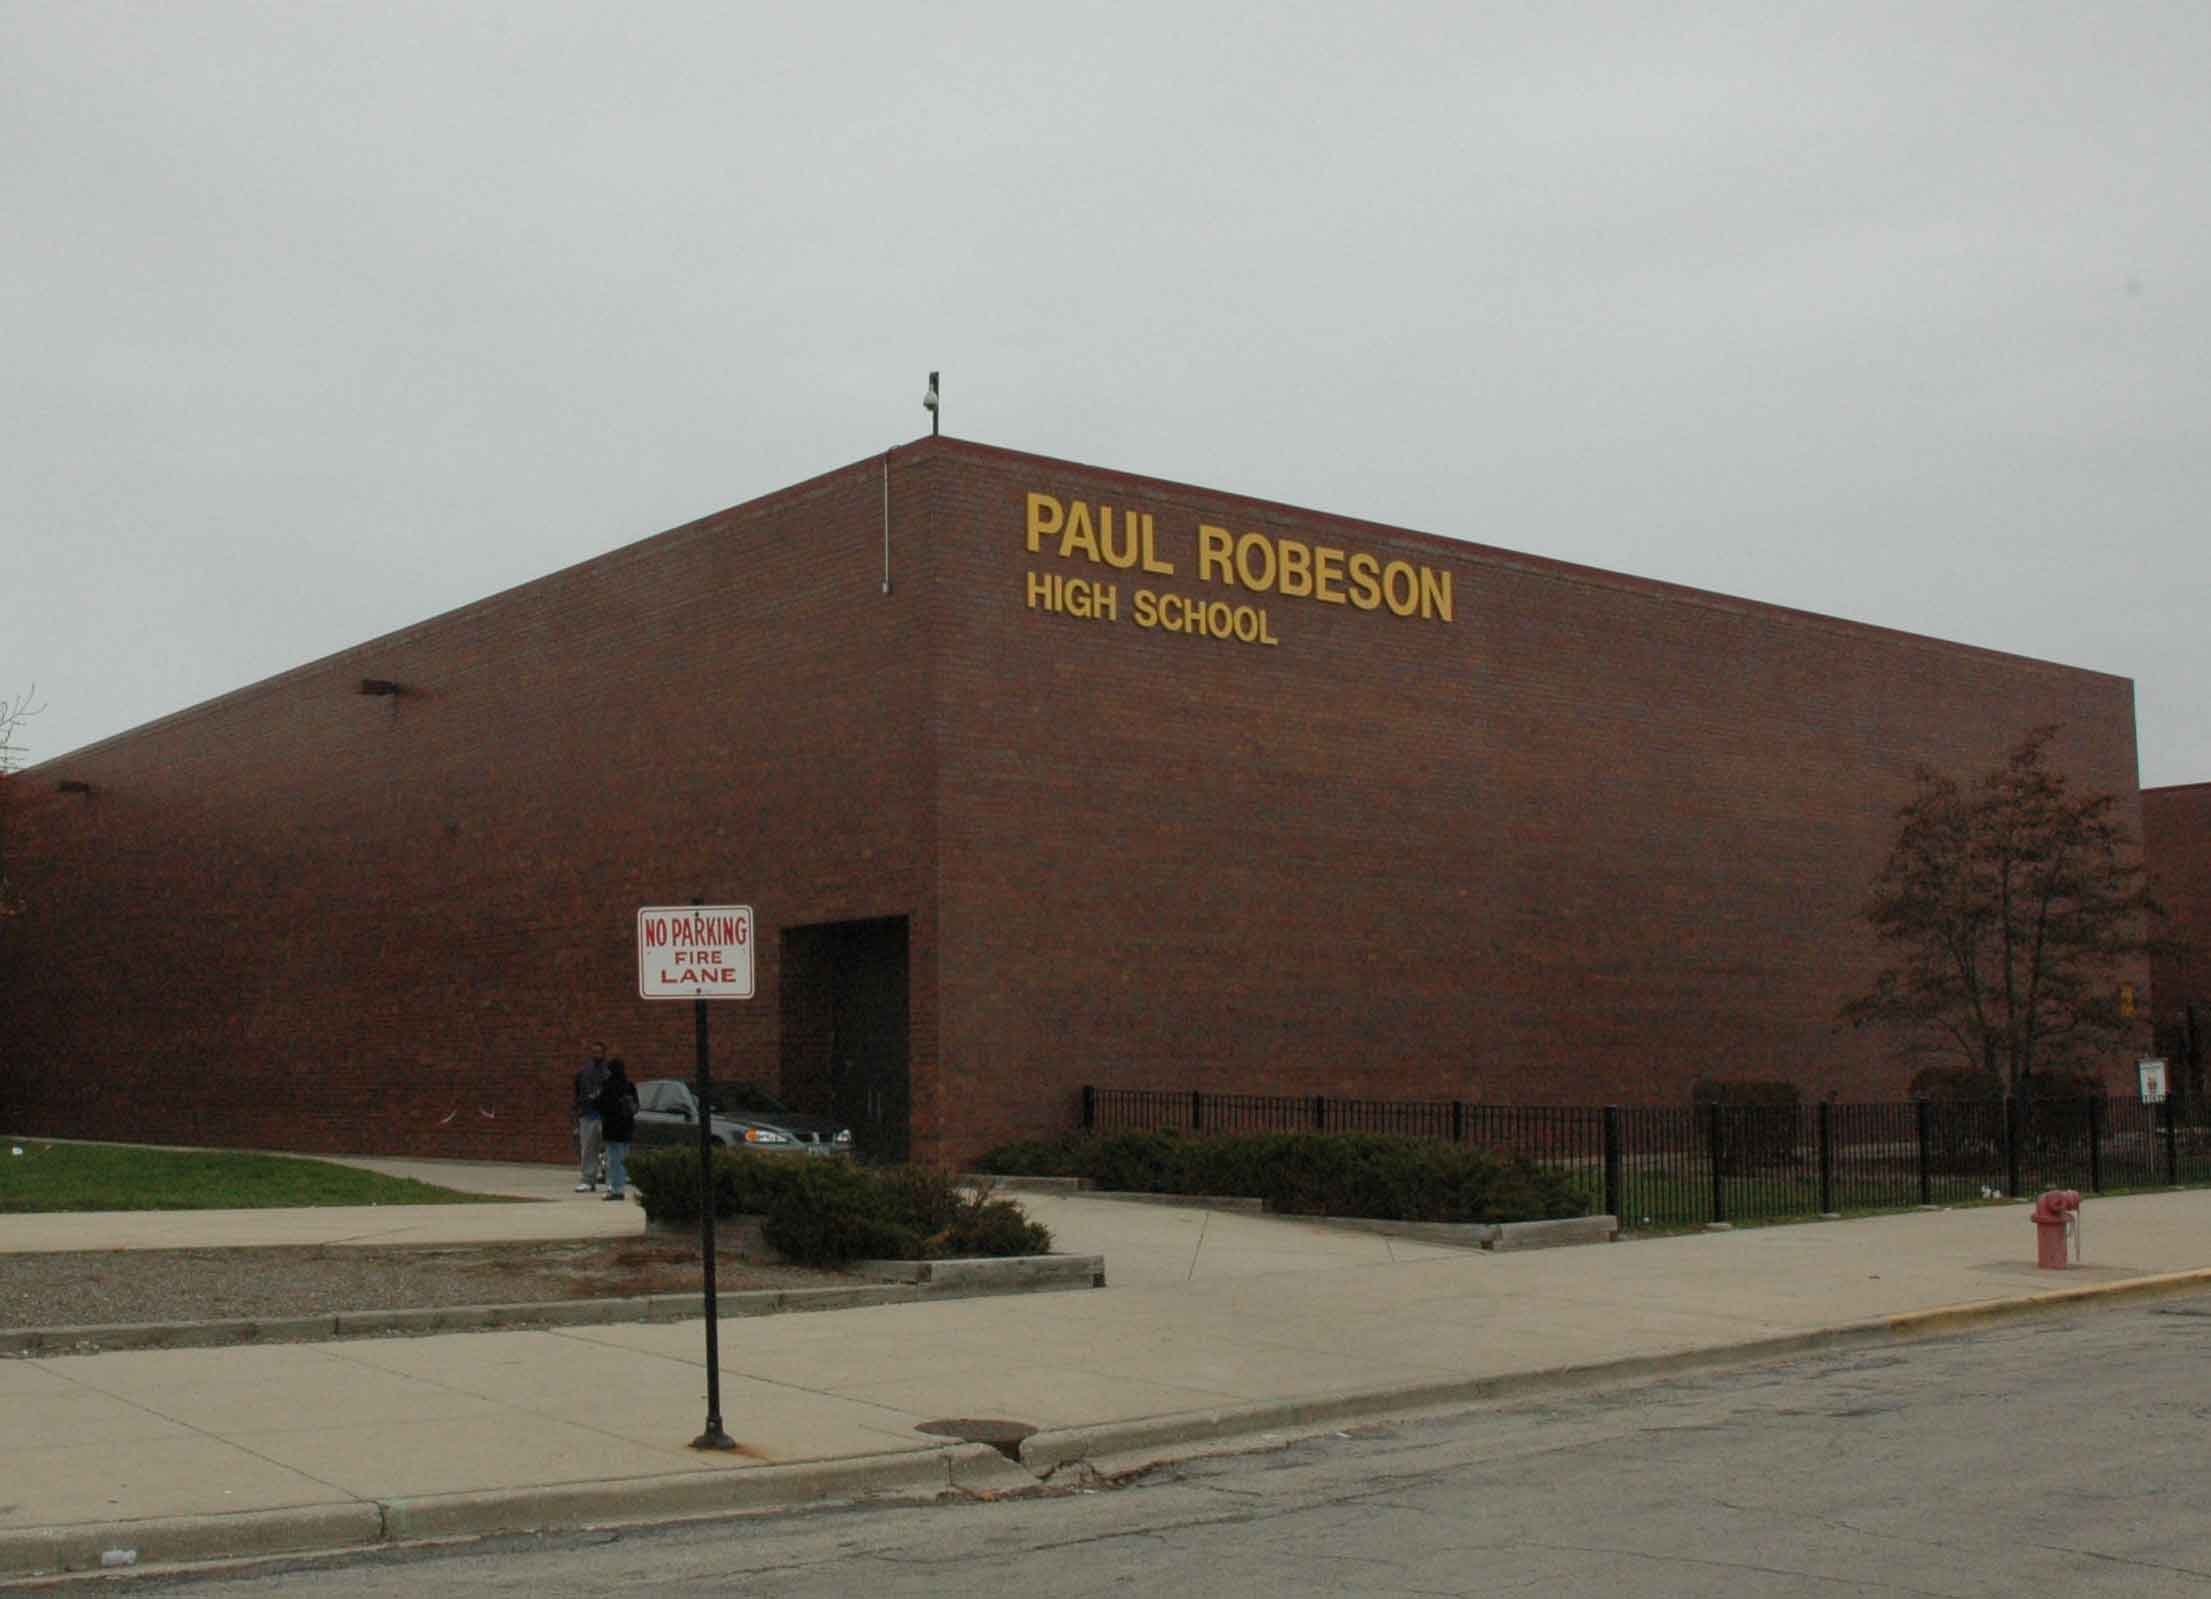 Paul robeson ford chicago #9